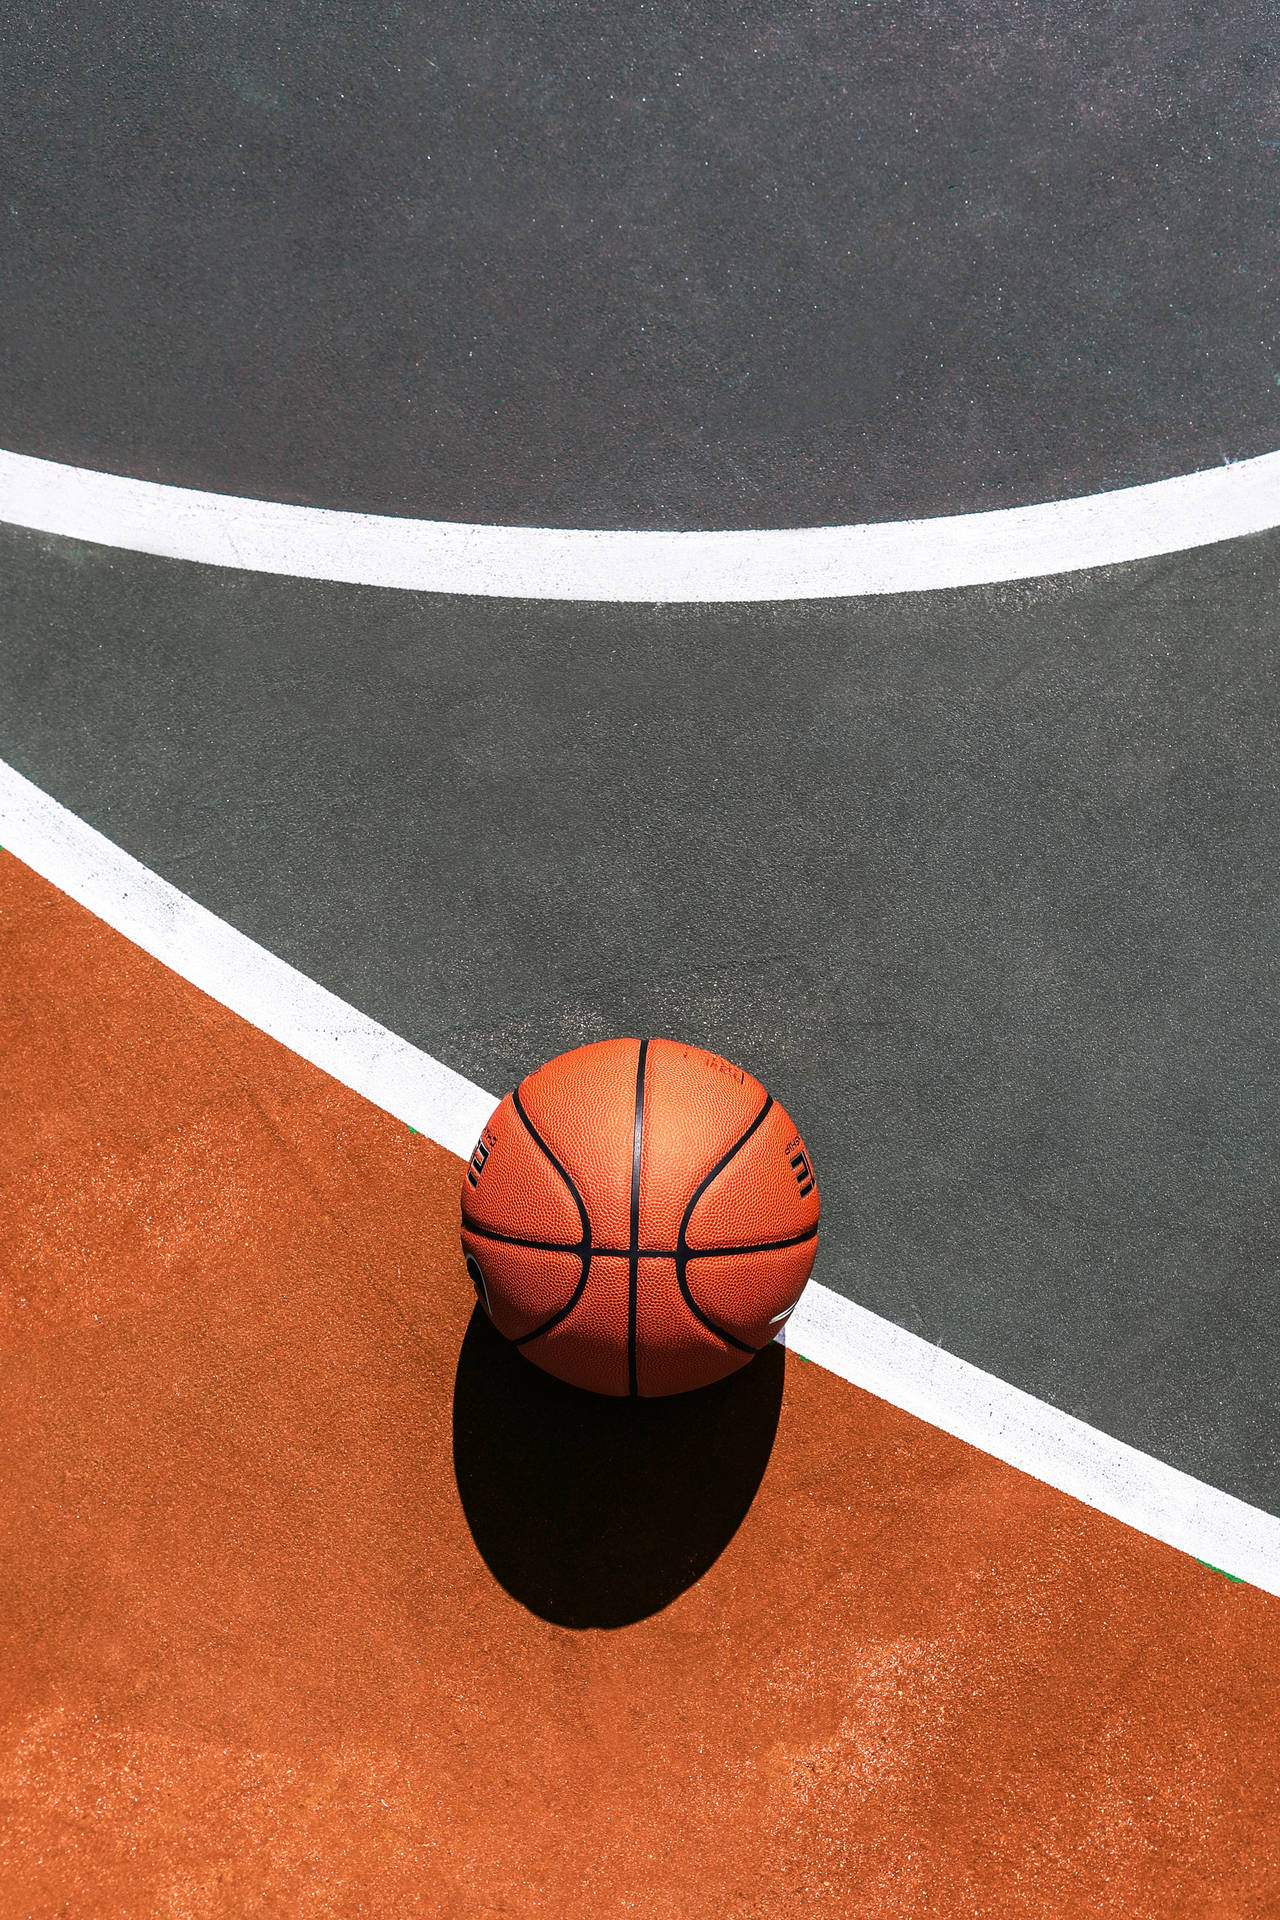 Ball On Basketball Court Top Focus Background